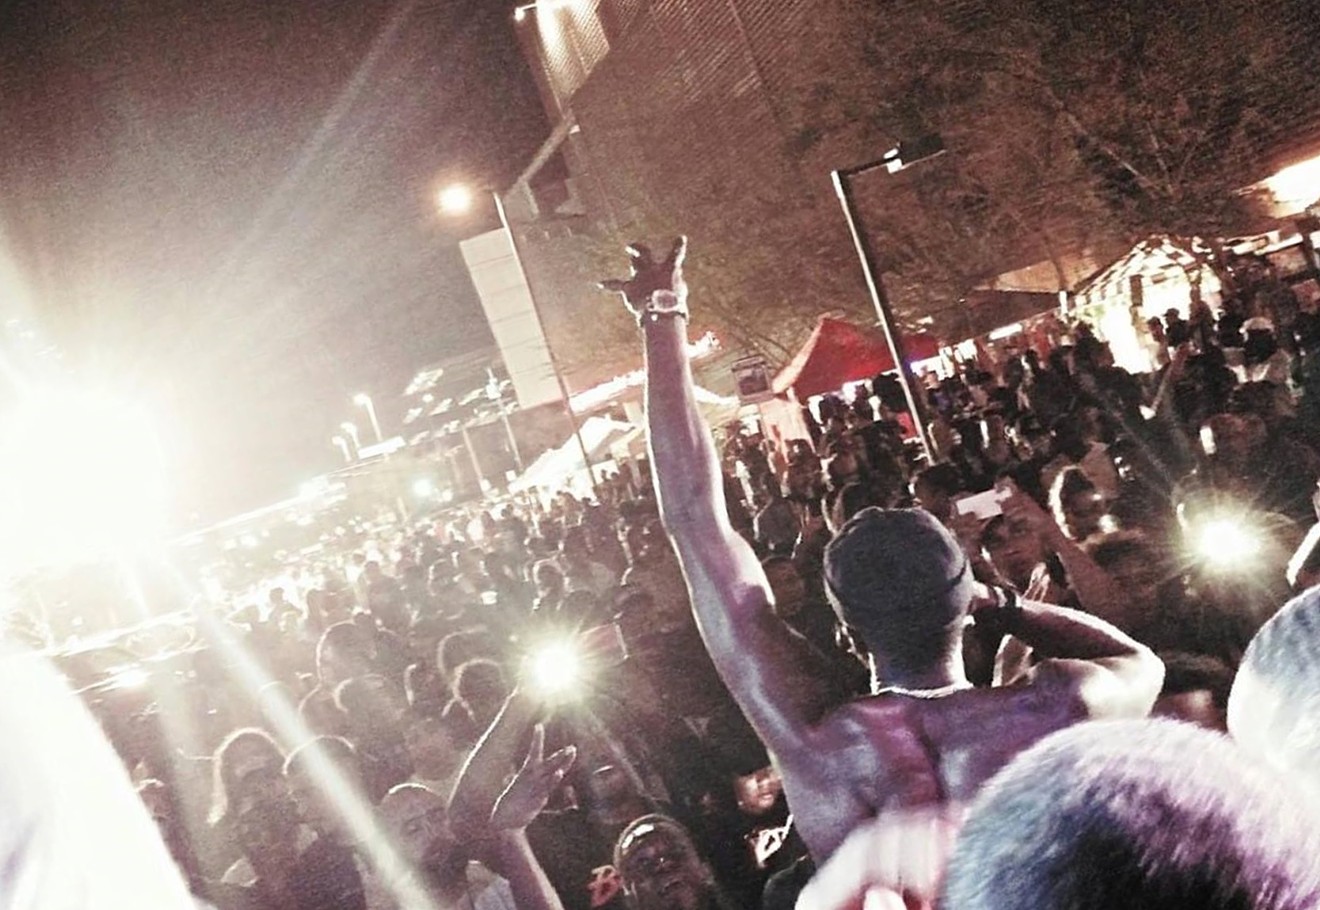 Will Claye performs at last year's Arizona Hip-Hop Festival in downtown Phoenix